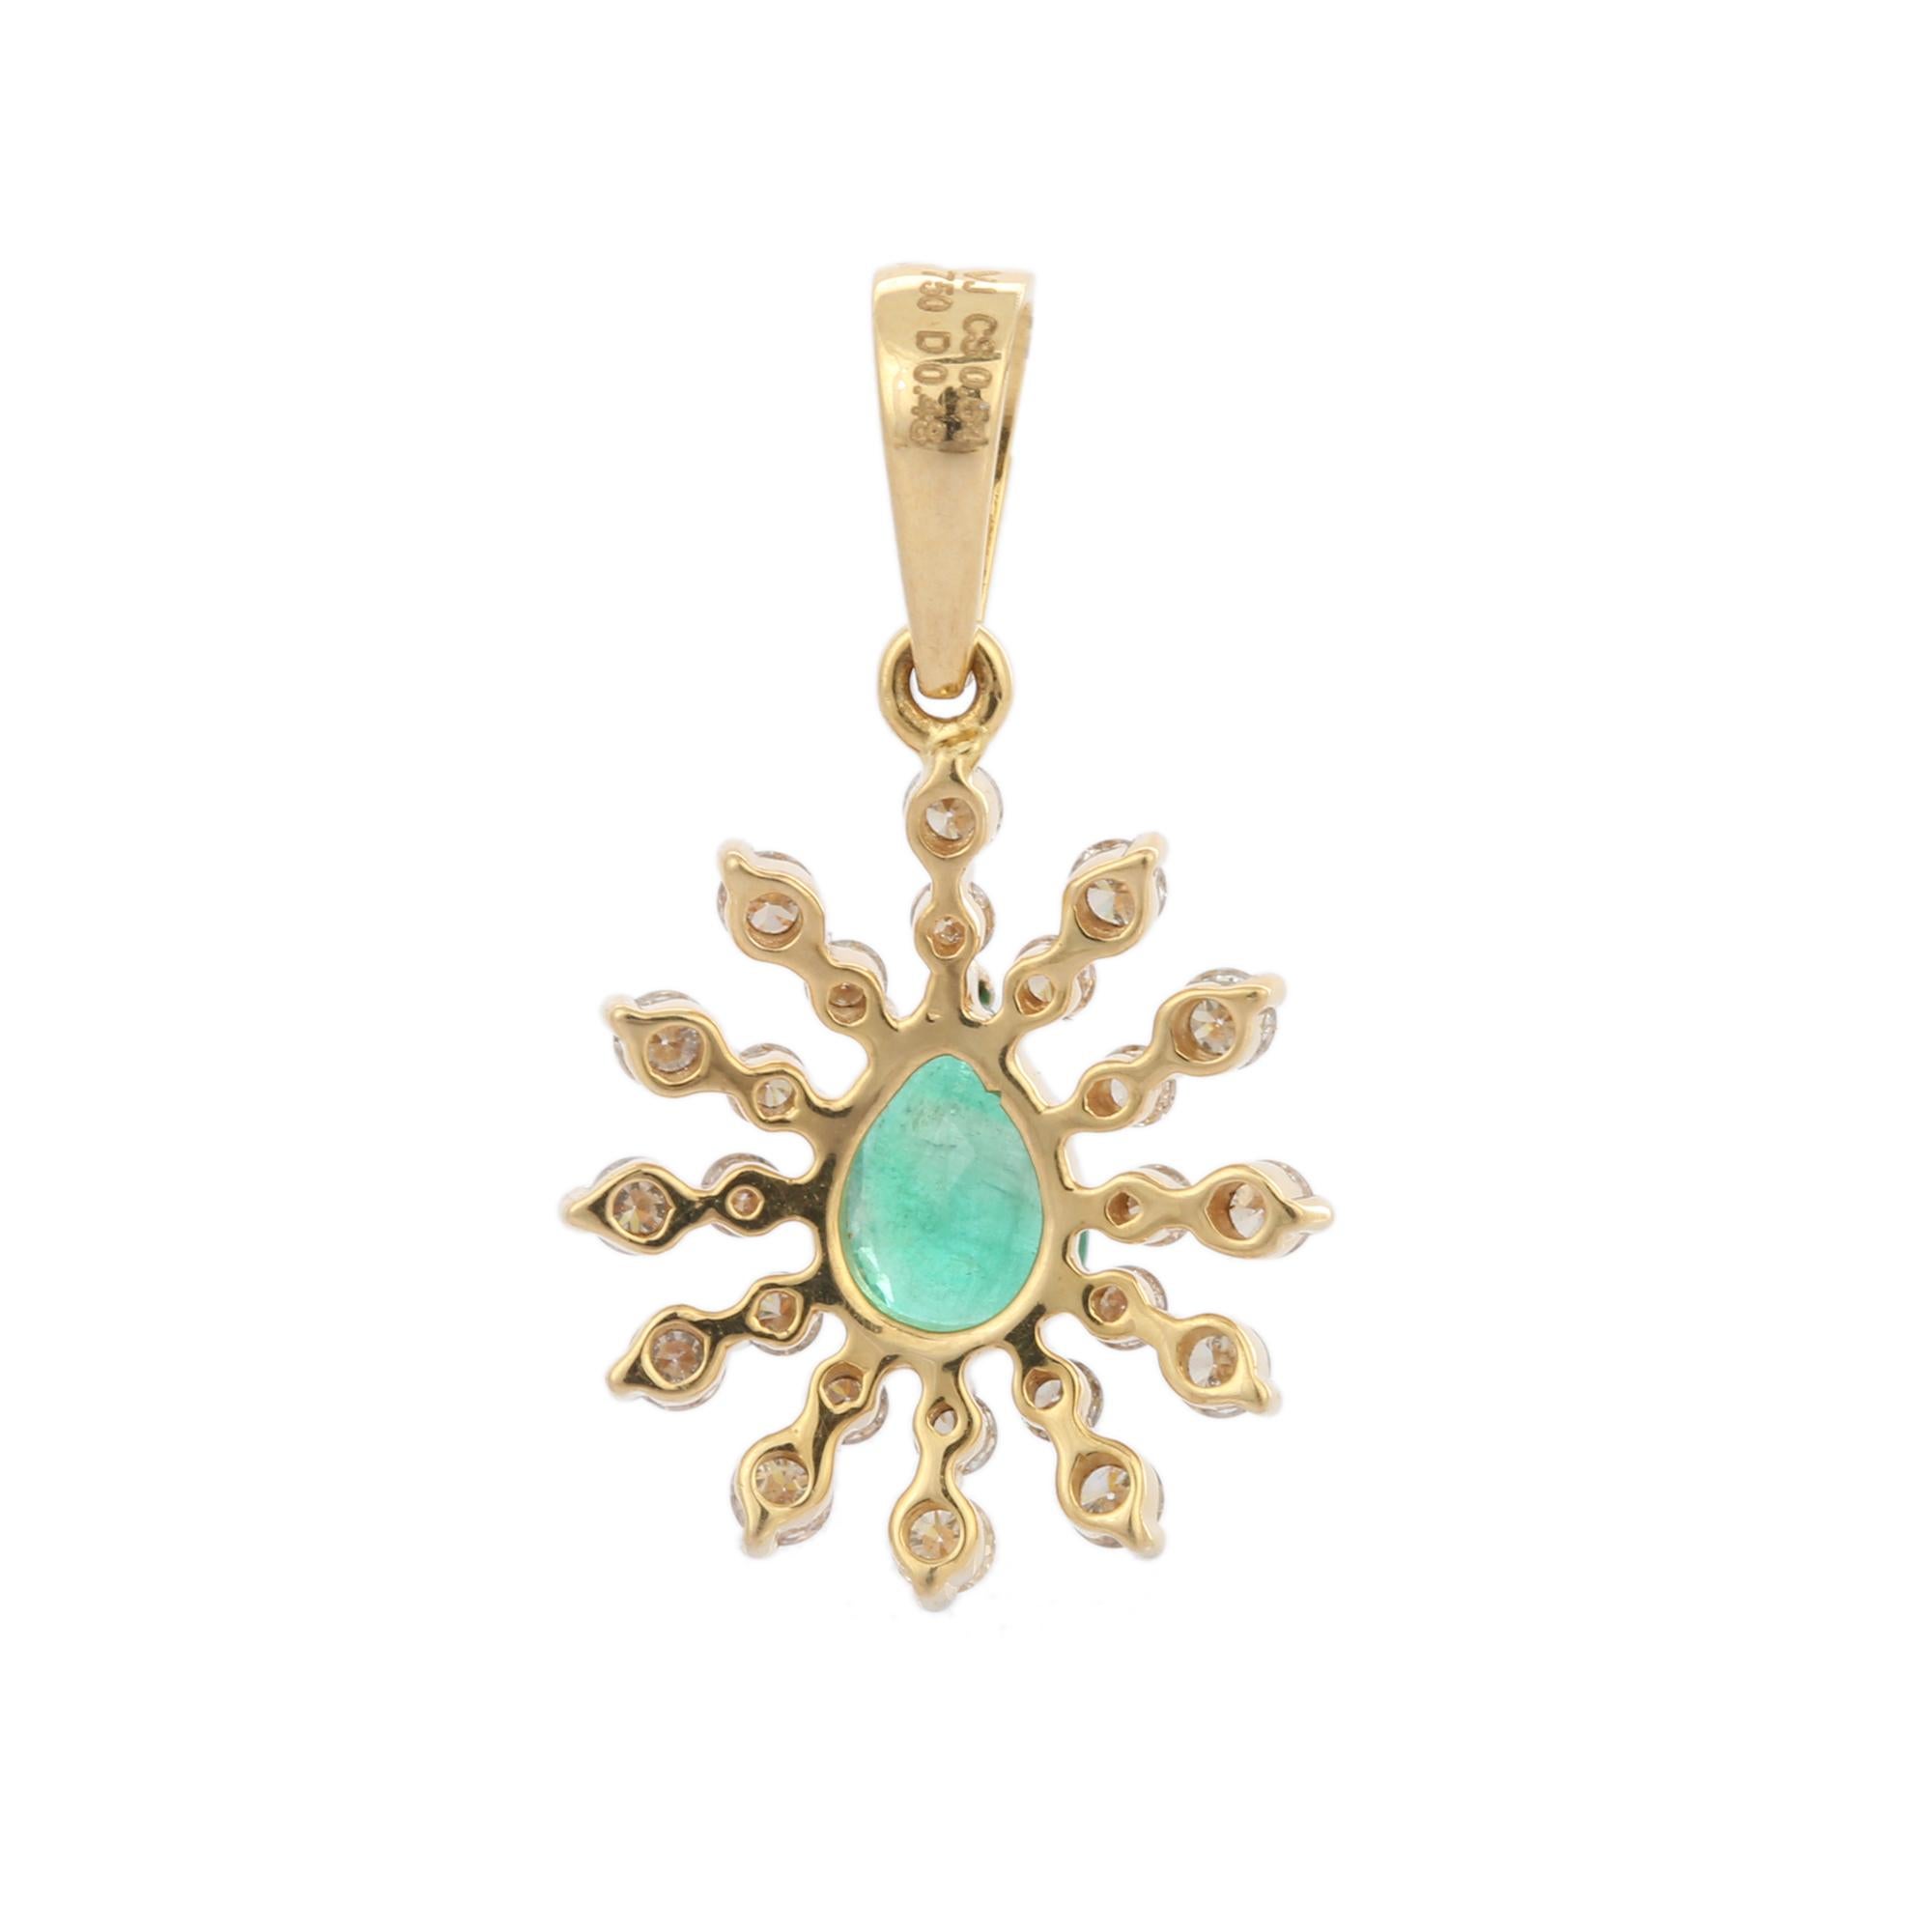 Natural Emerald pendant in 18K Gold. It has a pear cut emerald studded with diamonds that completes your look with a decent touch. Pendants are used to wear or gifted to represent love and promises. It's an attractive jewelry piece that goes with